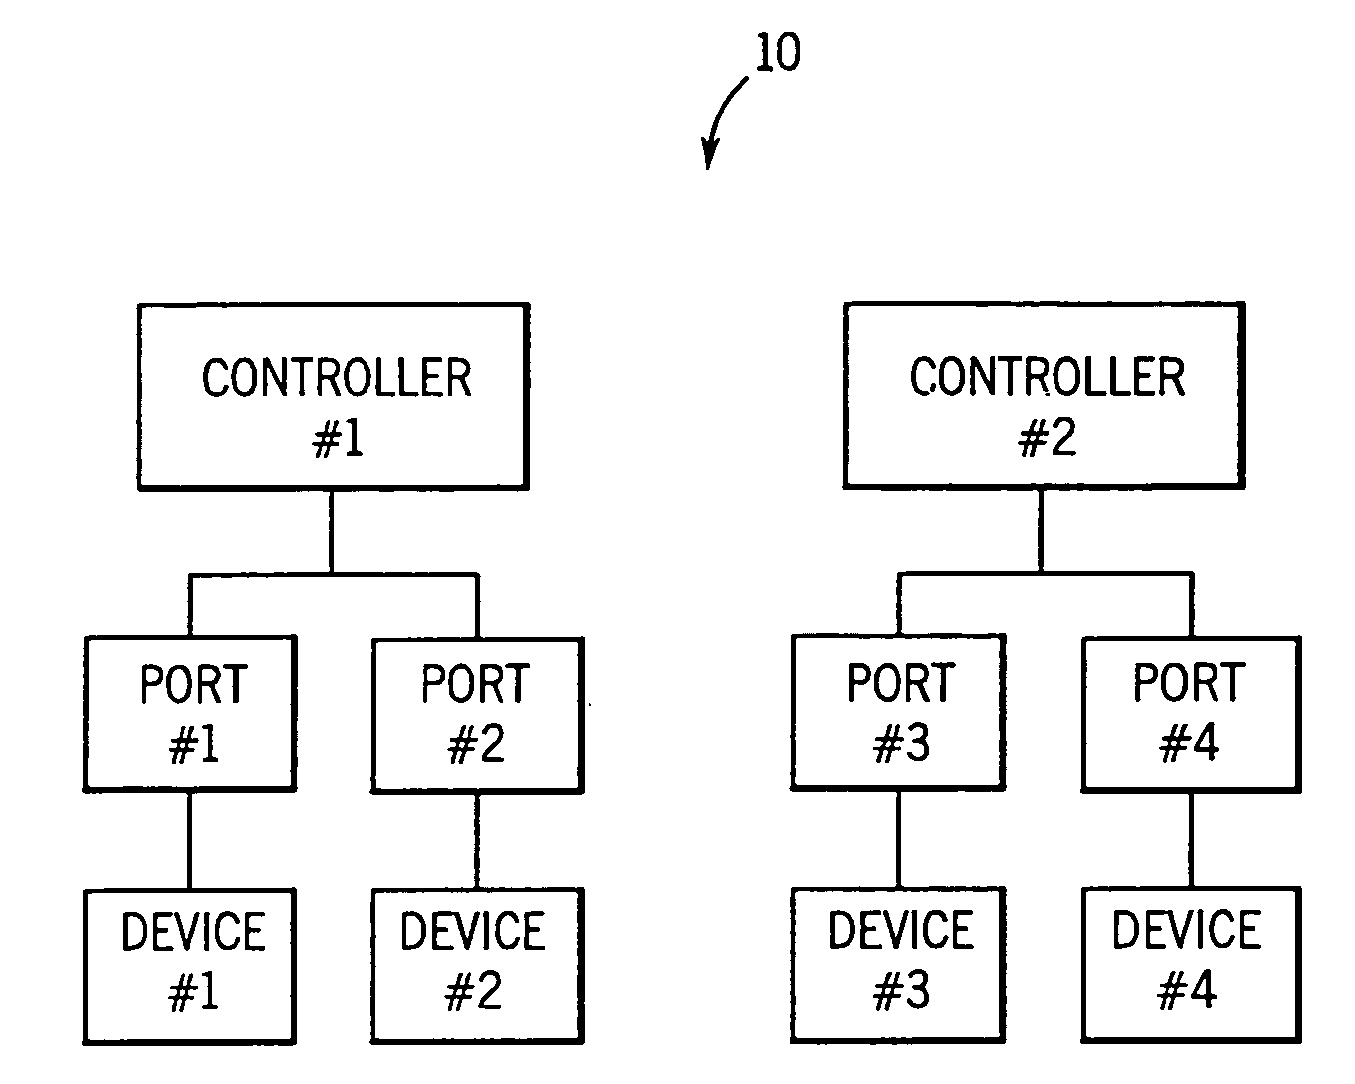 Dynamic allocation of devices to host controllers